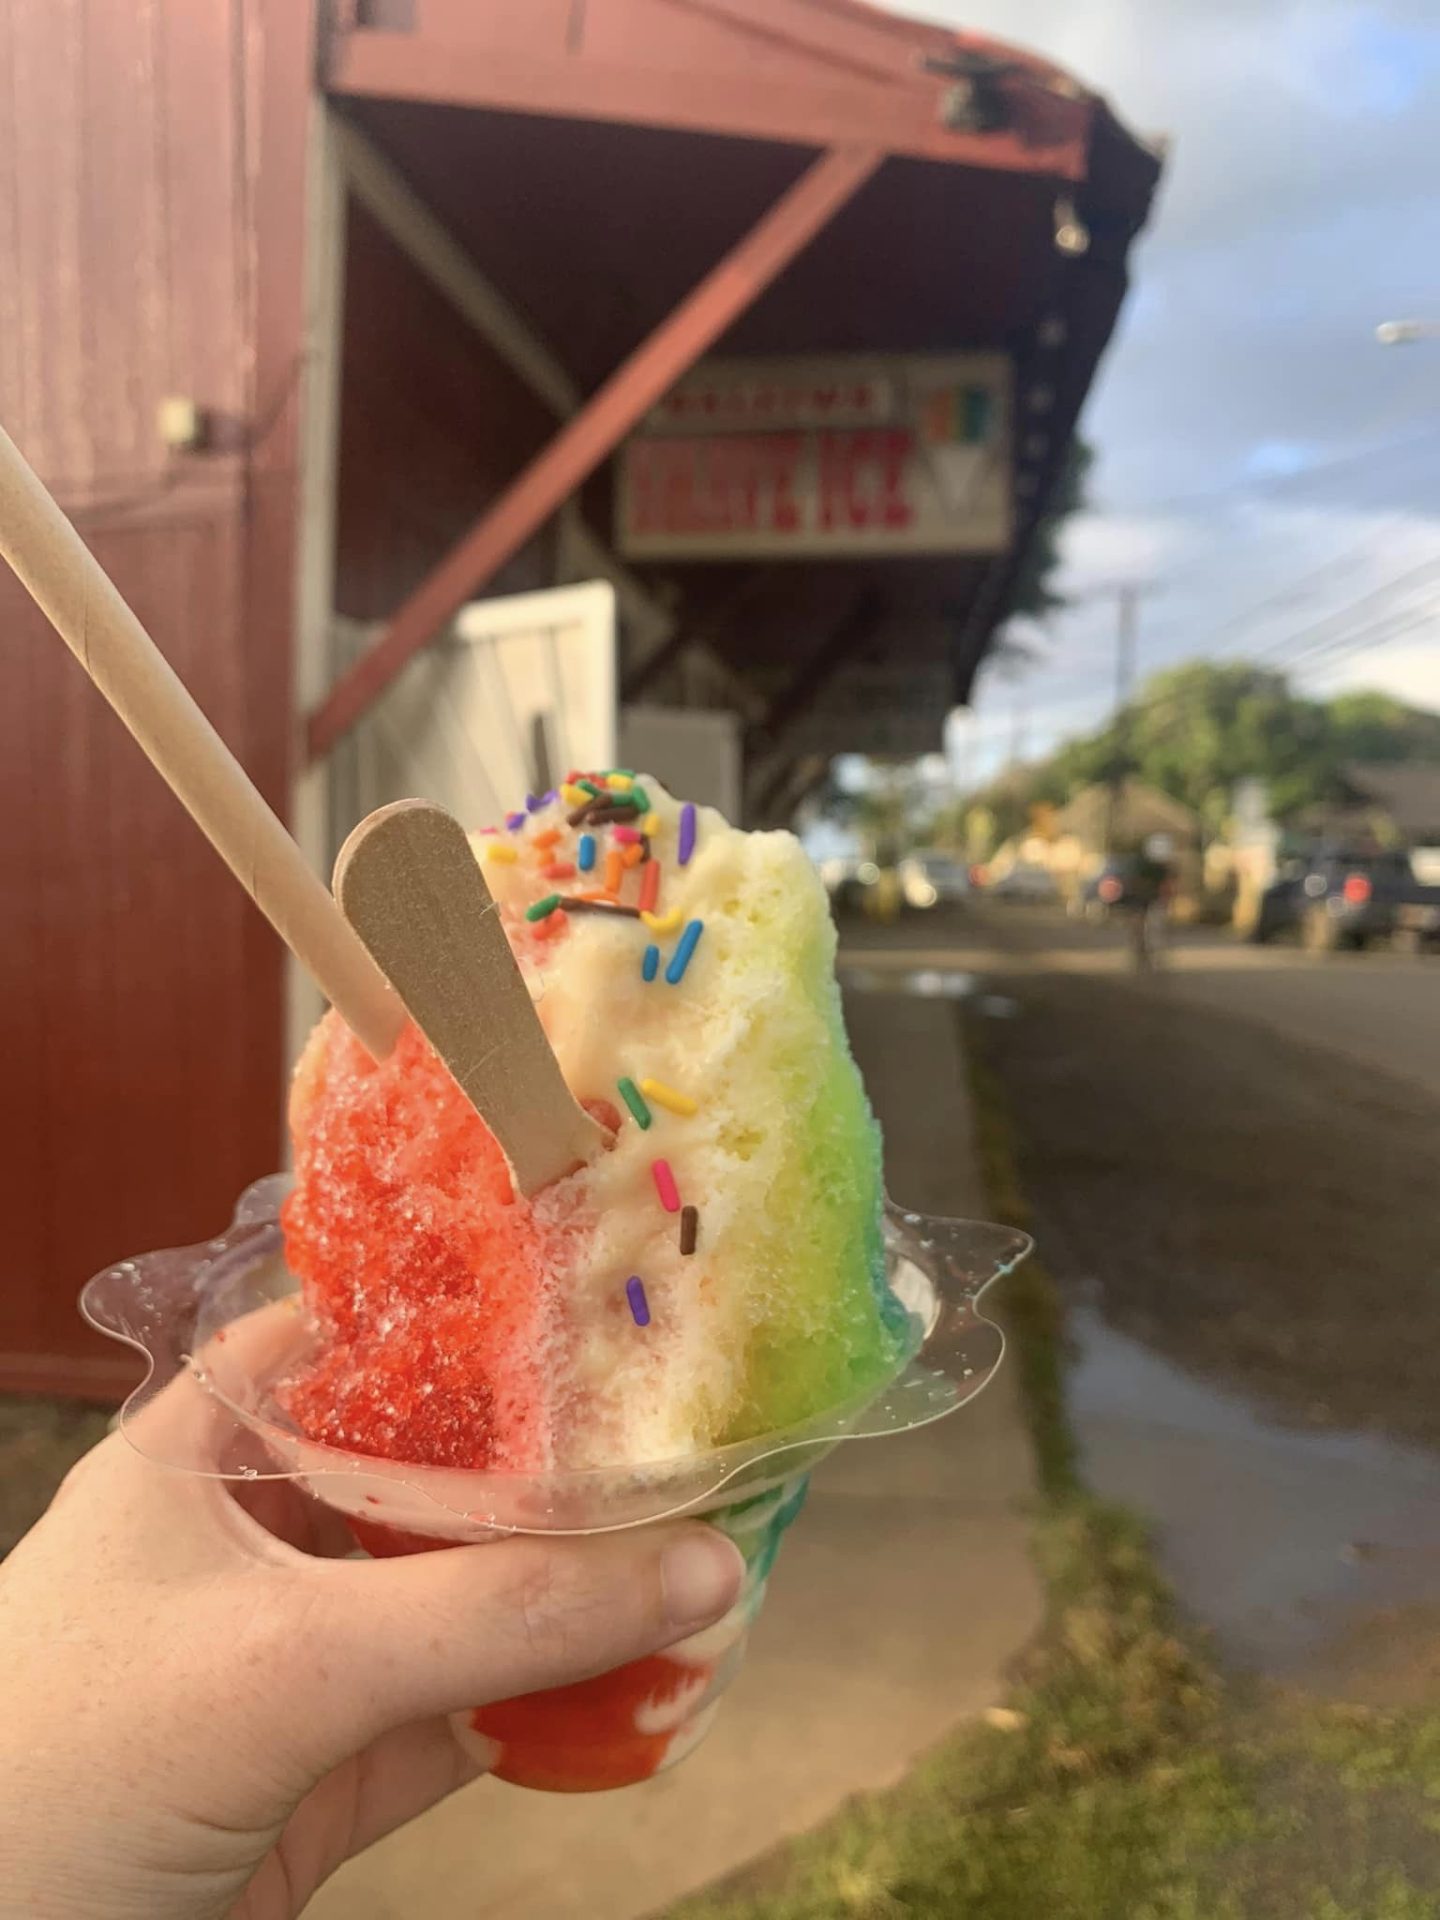 Hawaii Bucket List: Try some shave ice